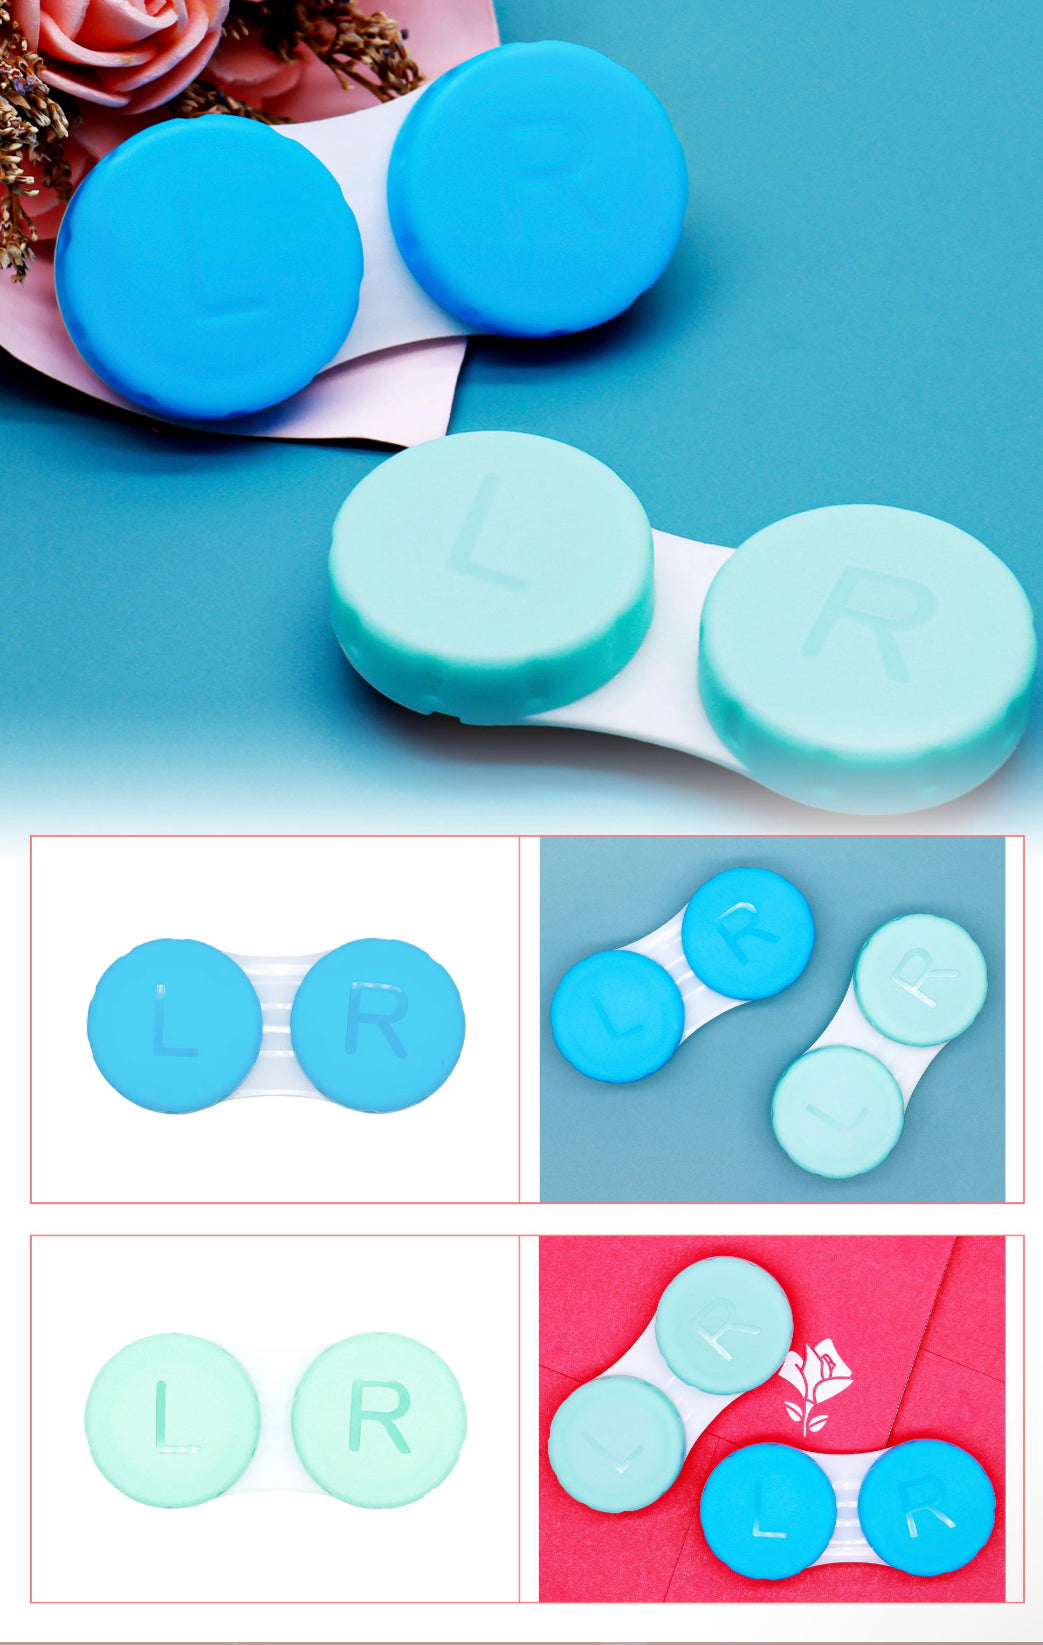 Contacts Case